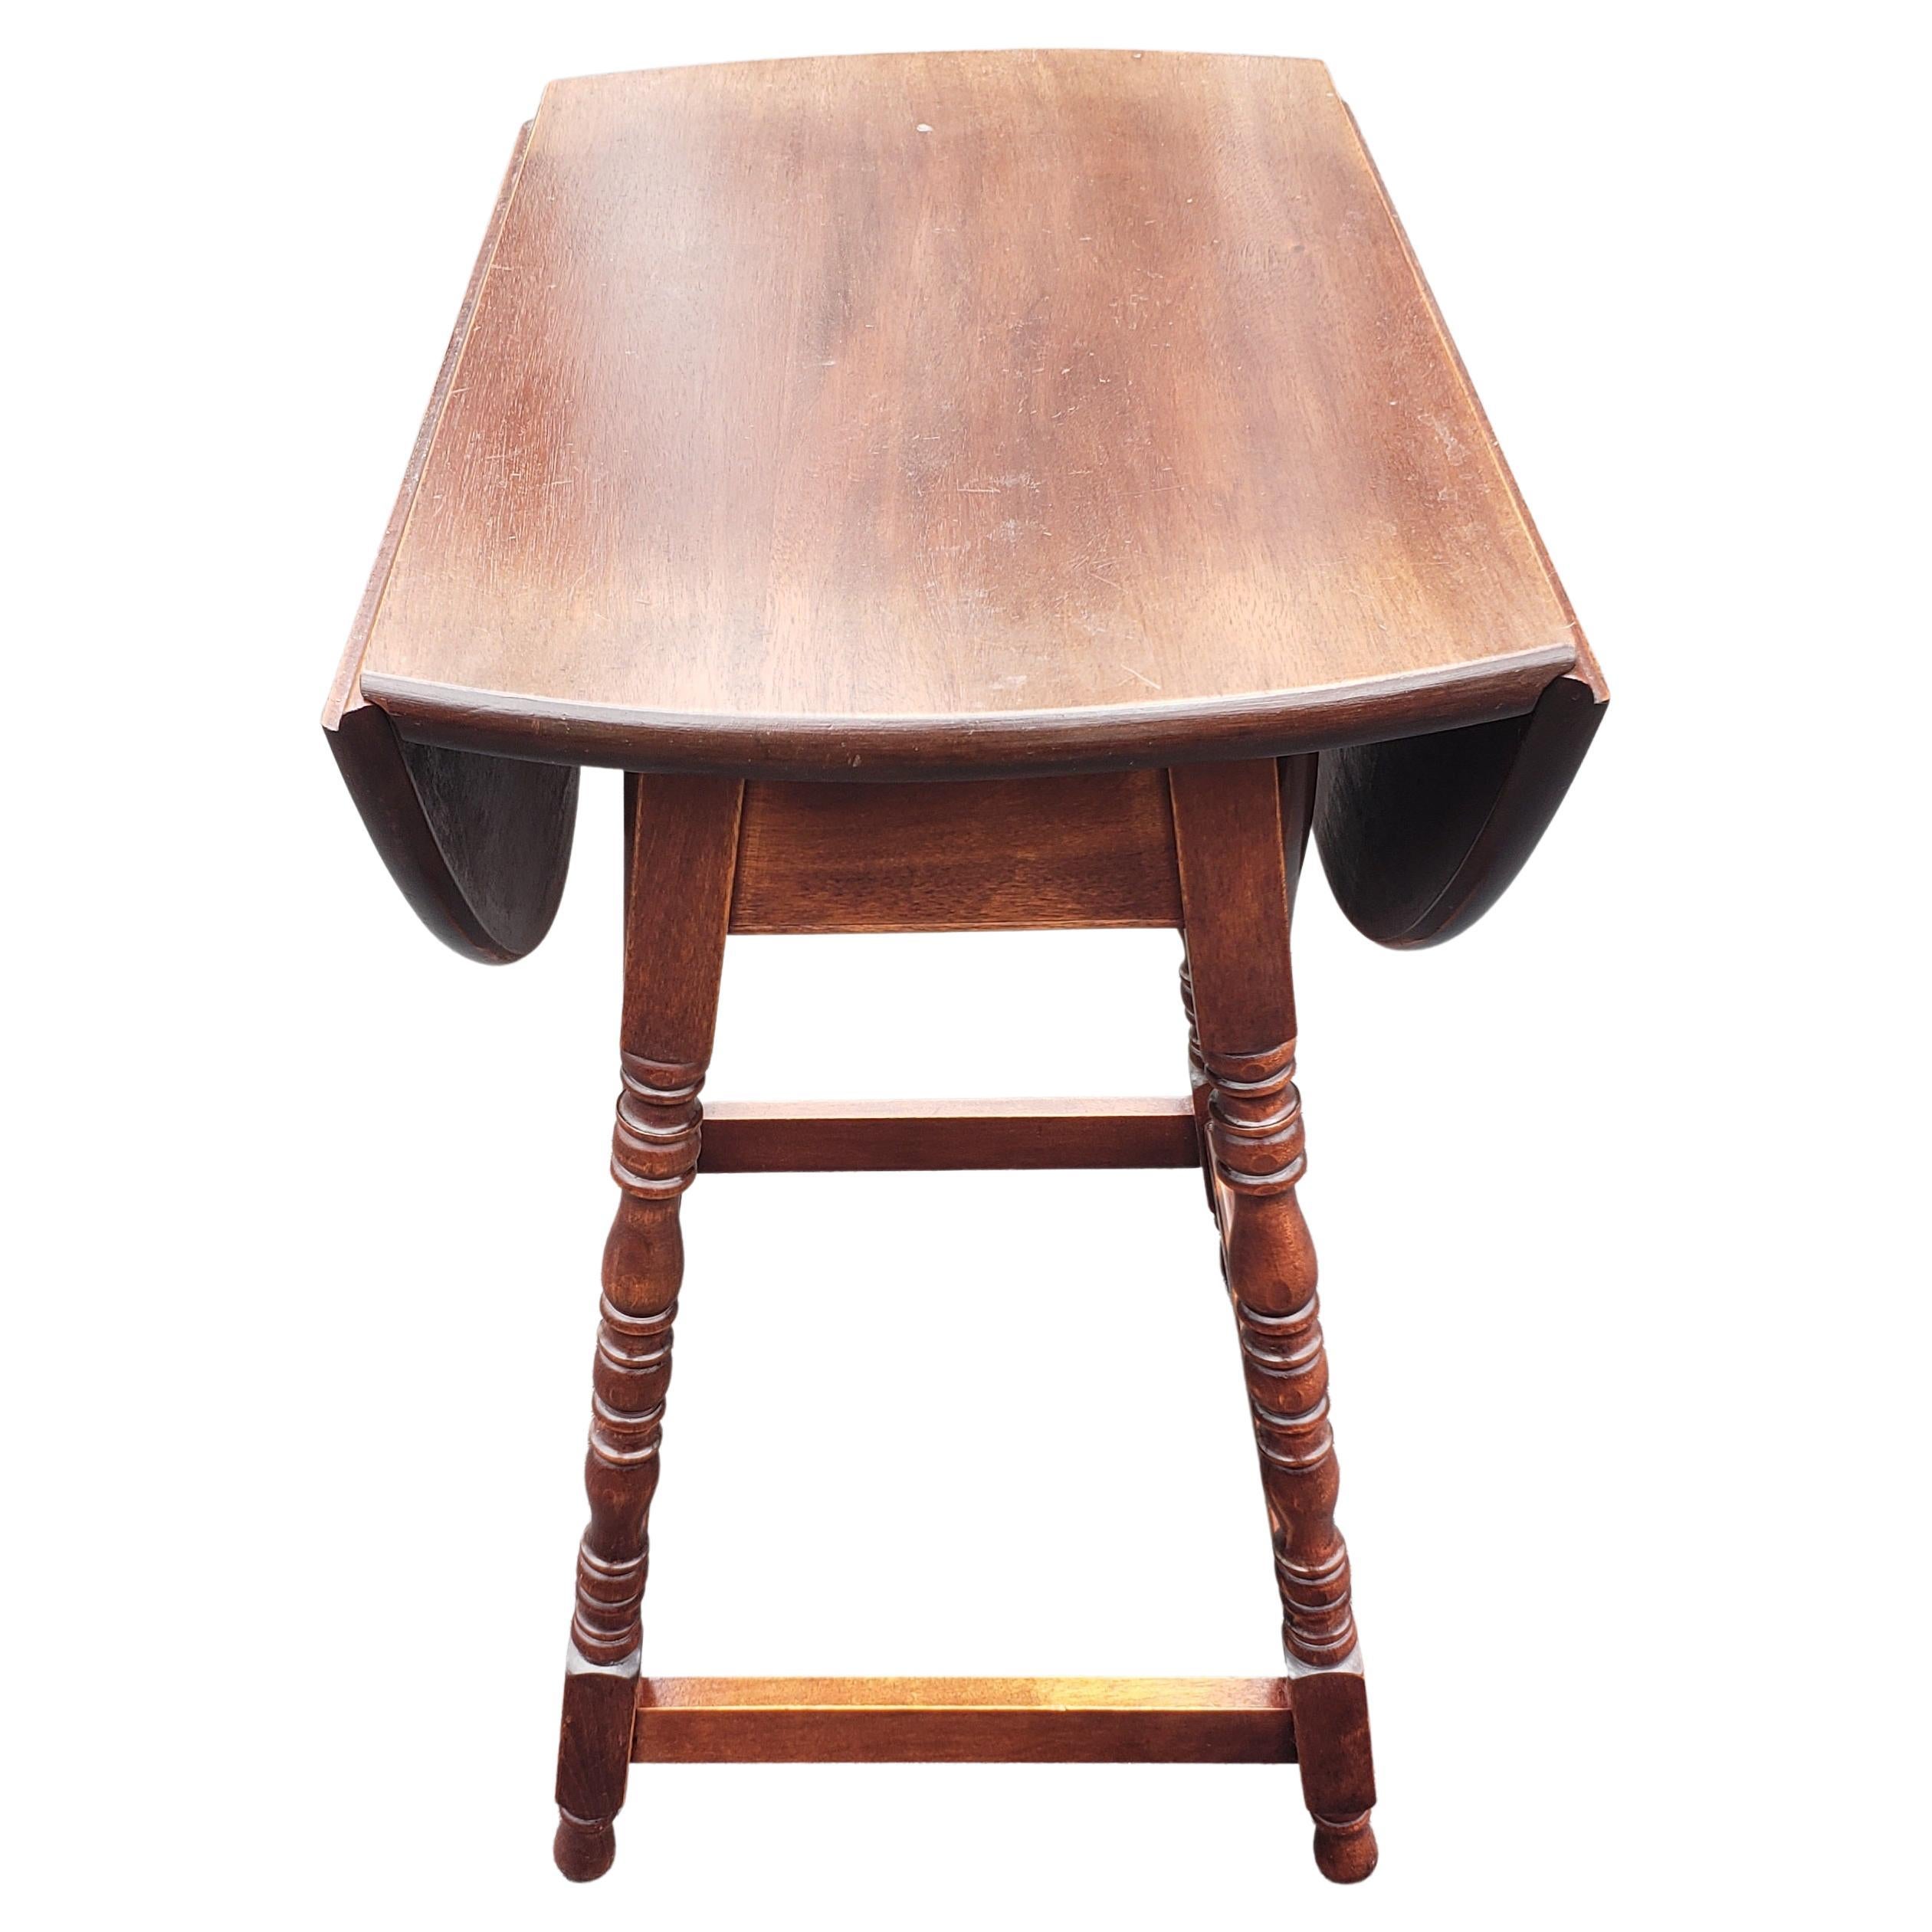 English mahogany oval drop leaf side table with bobbin legs. Very good vintage condition. Measures 14